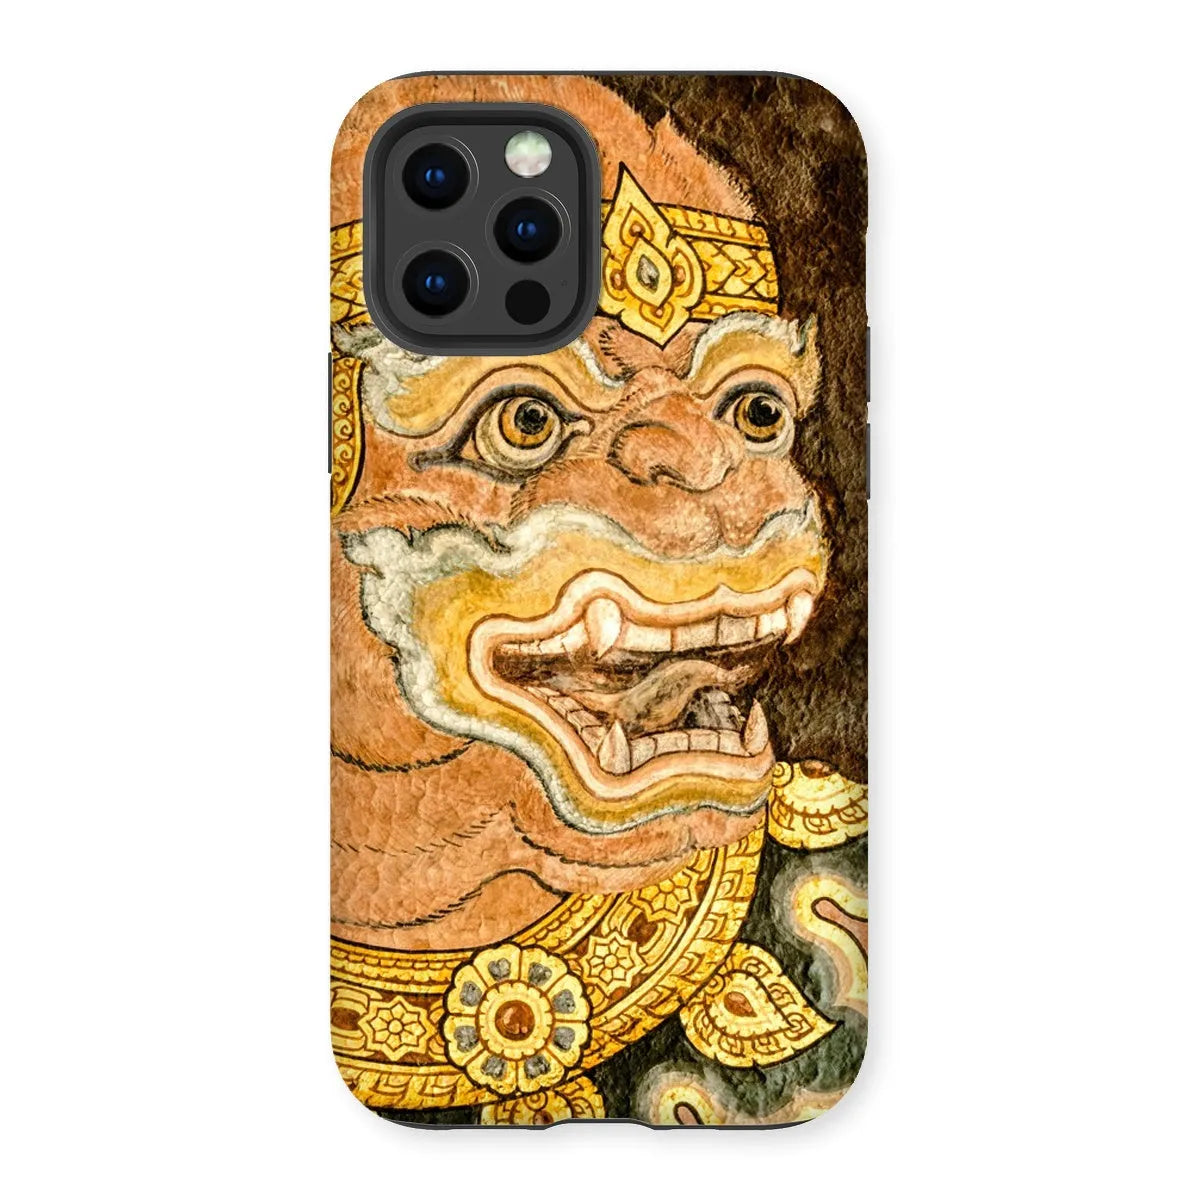 Monkey See - Traditional Thai Aesthetic Art Phone Case - Iphone 12 Pro / Matte - Mobile Phone Cases - Aesthetic Art